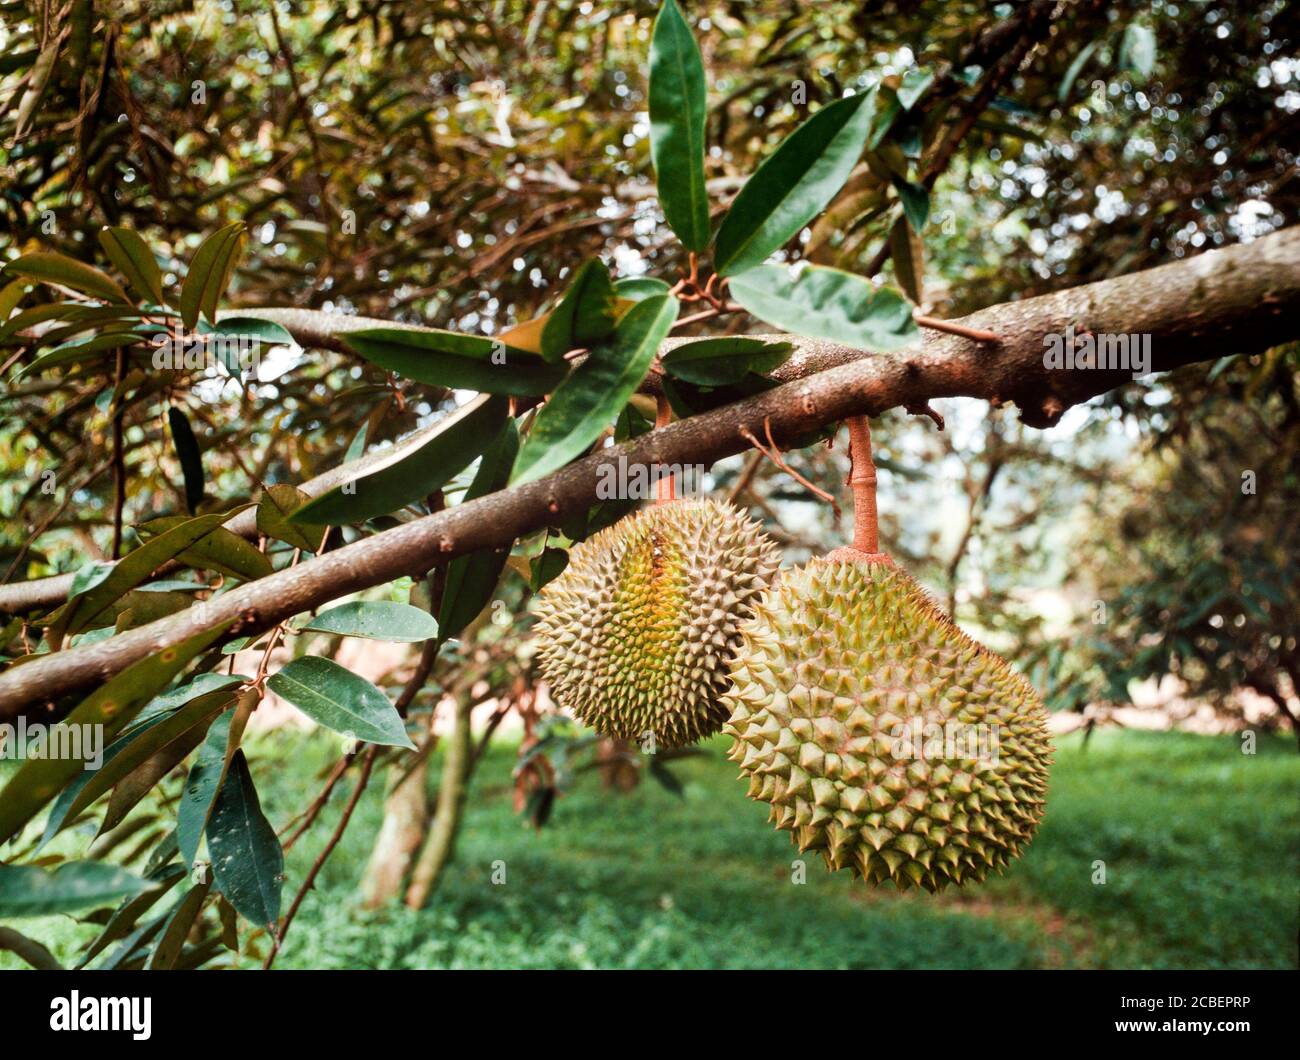 Durian fruit hanging from a tree, a hybridised dwarf variety allowing easier harvesting. Stock Photo